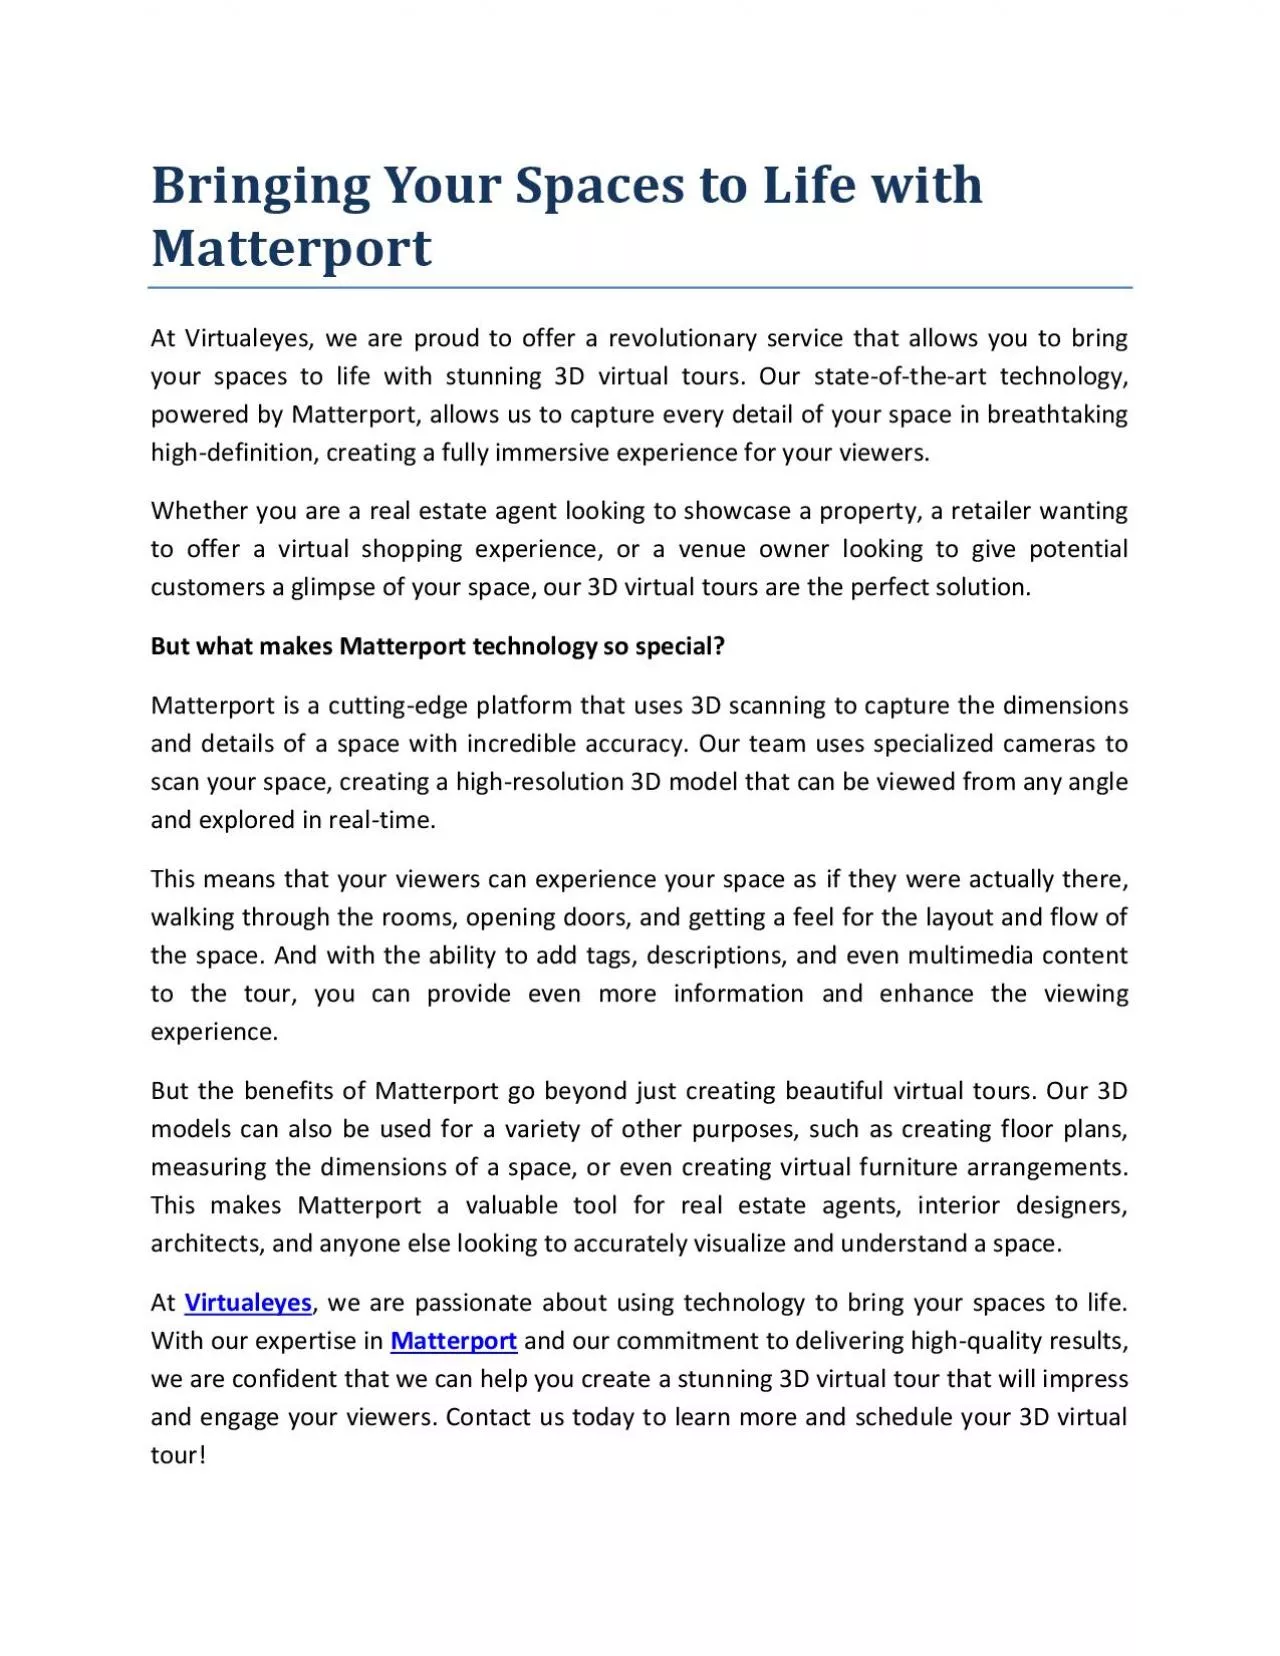 Bringing Your Spaces to Life with Matterport